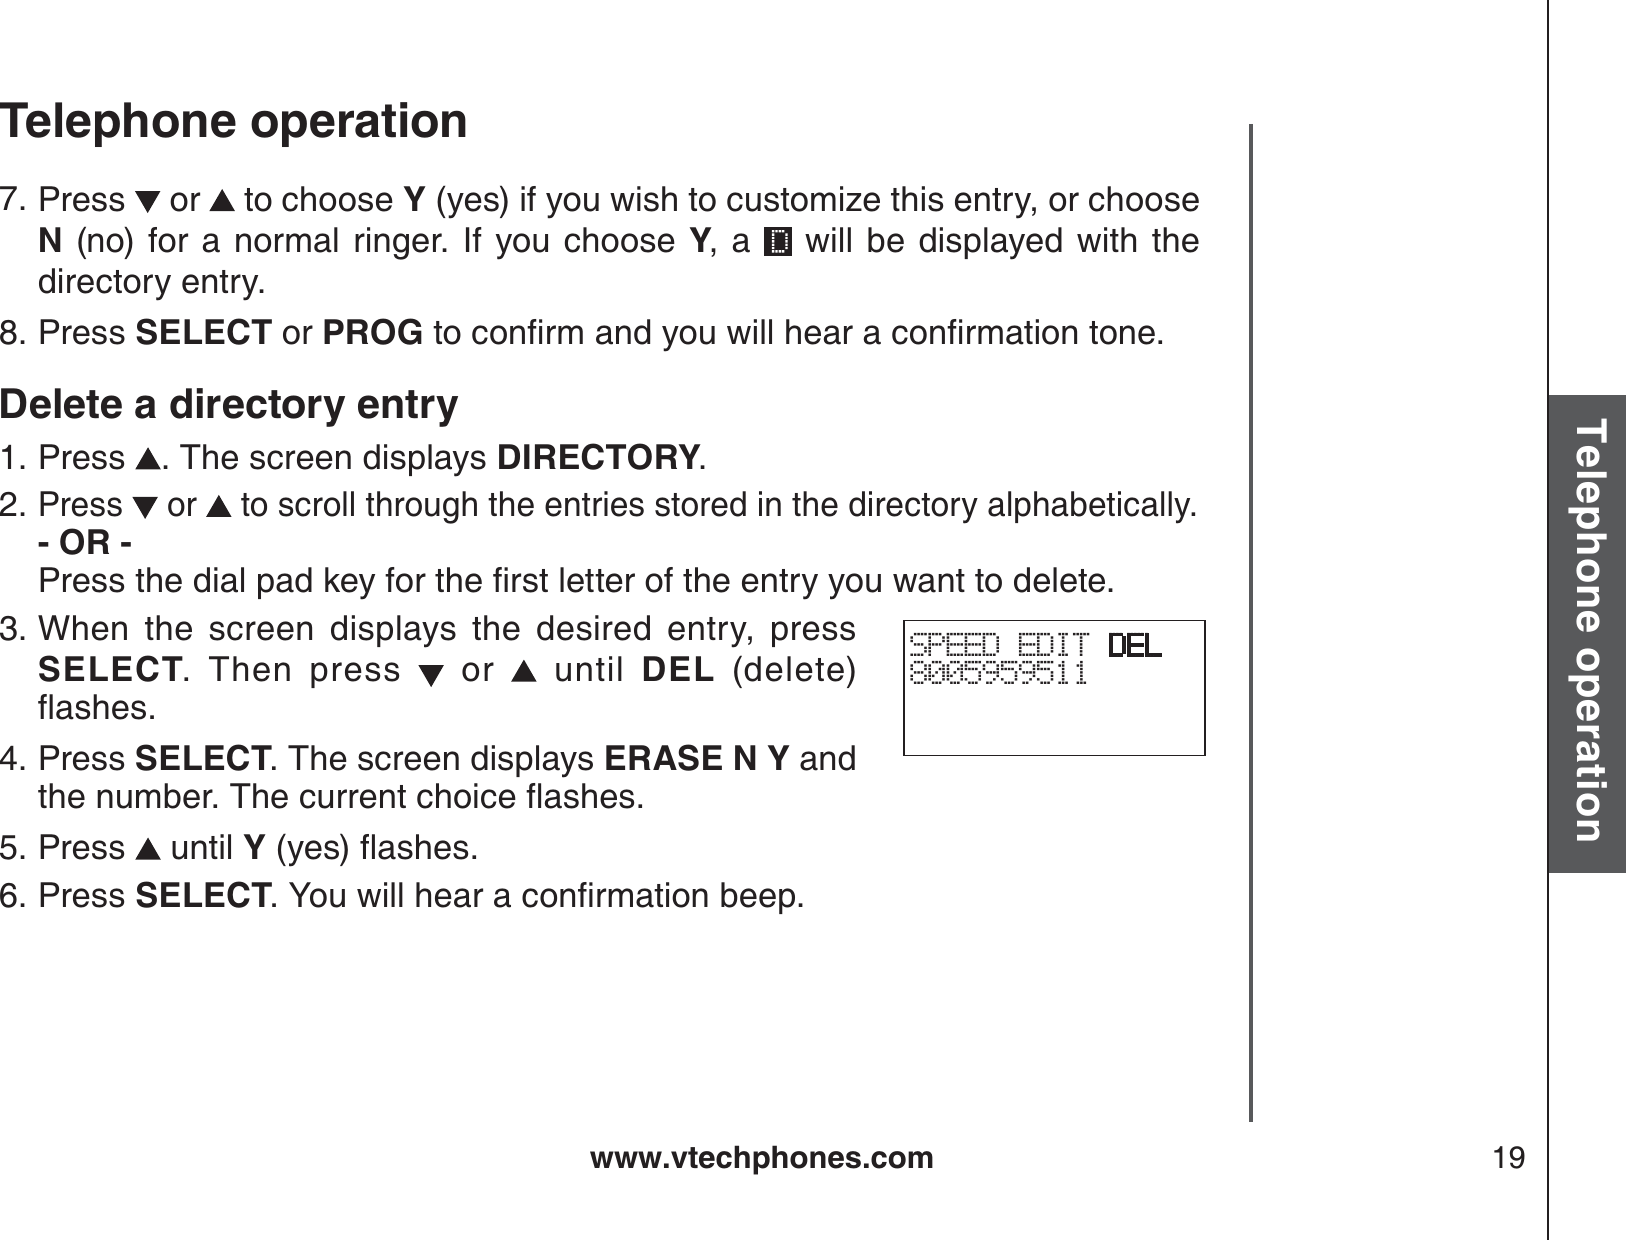 www.vtechphones.com 19Basic operationTelephone operationTelephone operationPress   or   to choose Y (yes) if you wish to customize this entry, or choose N (no) for a normal ringer. If you choose Y, a   will be displayed with the directory entry.Press SELECT or PROGVQEQPſTOCPF[QWYKNNJGCTCEQPſTOCVKQPVQPGDelete a directory entryPress  . The screen displays DIRECTORY.Press   or   to scroll through the entries stored in the directory alphabetically.- OR -         2TGUUVJGFKCNRCFMG[HQTVJGſTUVNGVVGTQHVJGGPVT[[QWYCPVVQFGNGVGWhen the screen displays the desired entry, press SELECT. Then press   or   until DEL (delete)ƀCUJGUPress SELECT. The screen displays ERASE N Y and VJGPWODGT6JGEWTTGPVEJQKEGƀCUJGUPress   until Y(yes)ƀCUJGUPress SELECT;QWYKNNJGCTCEQPſTOCVKQPDGGR7.8.1.2.3.4.5.6.SPEED EDIT DEL8005959511